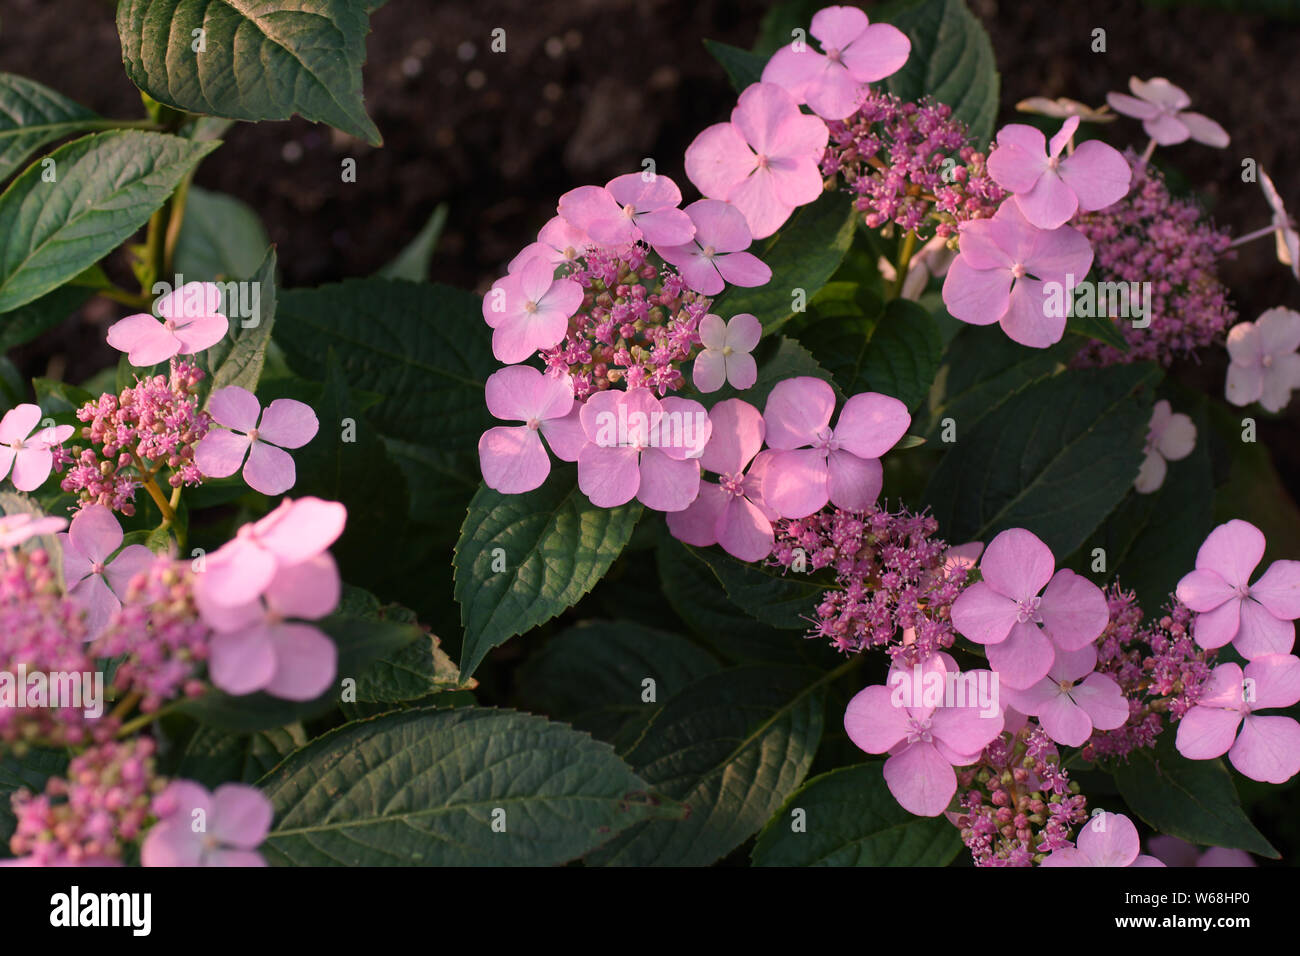 Hydrangea serrata Intermedia pink a corymb. А species of flowering plant in the family Hydrangeaceae, native to of Korea and Japan. Stock Photo